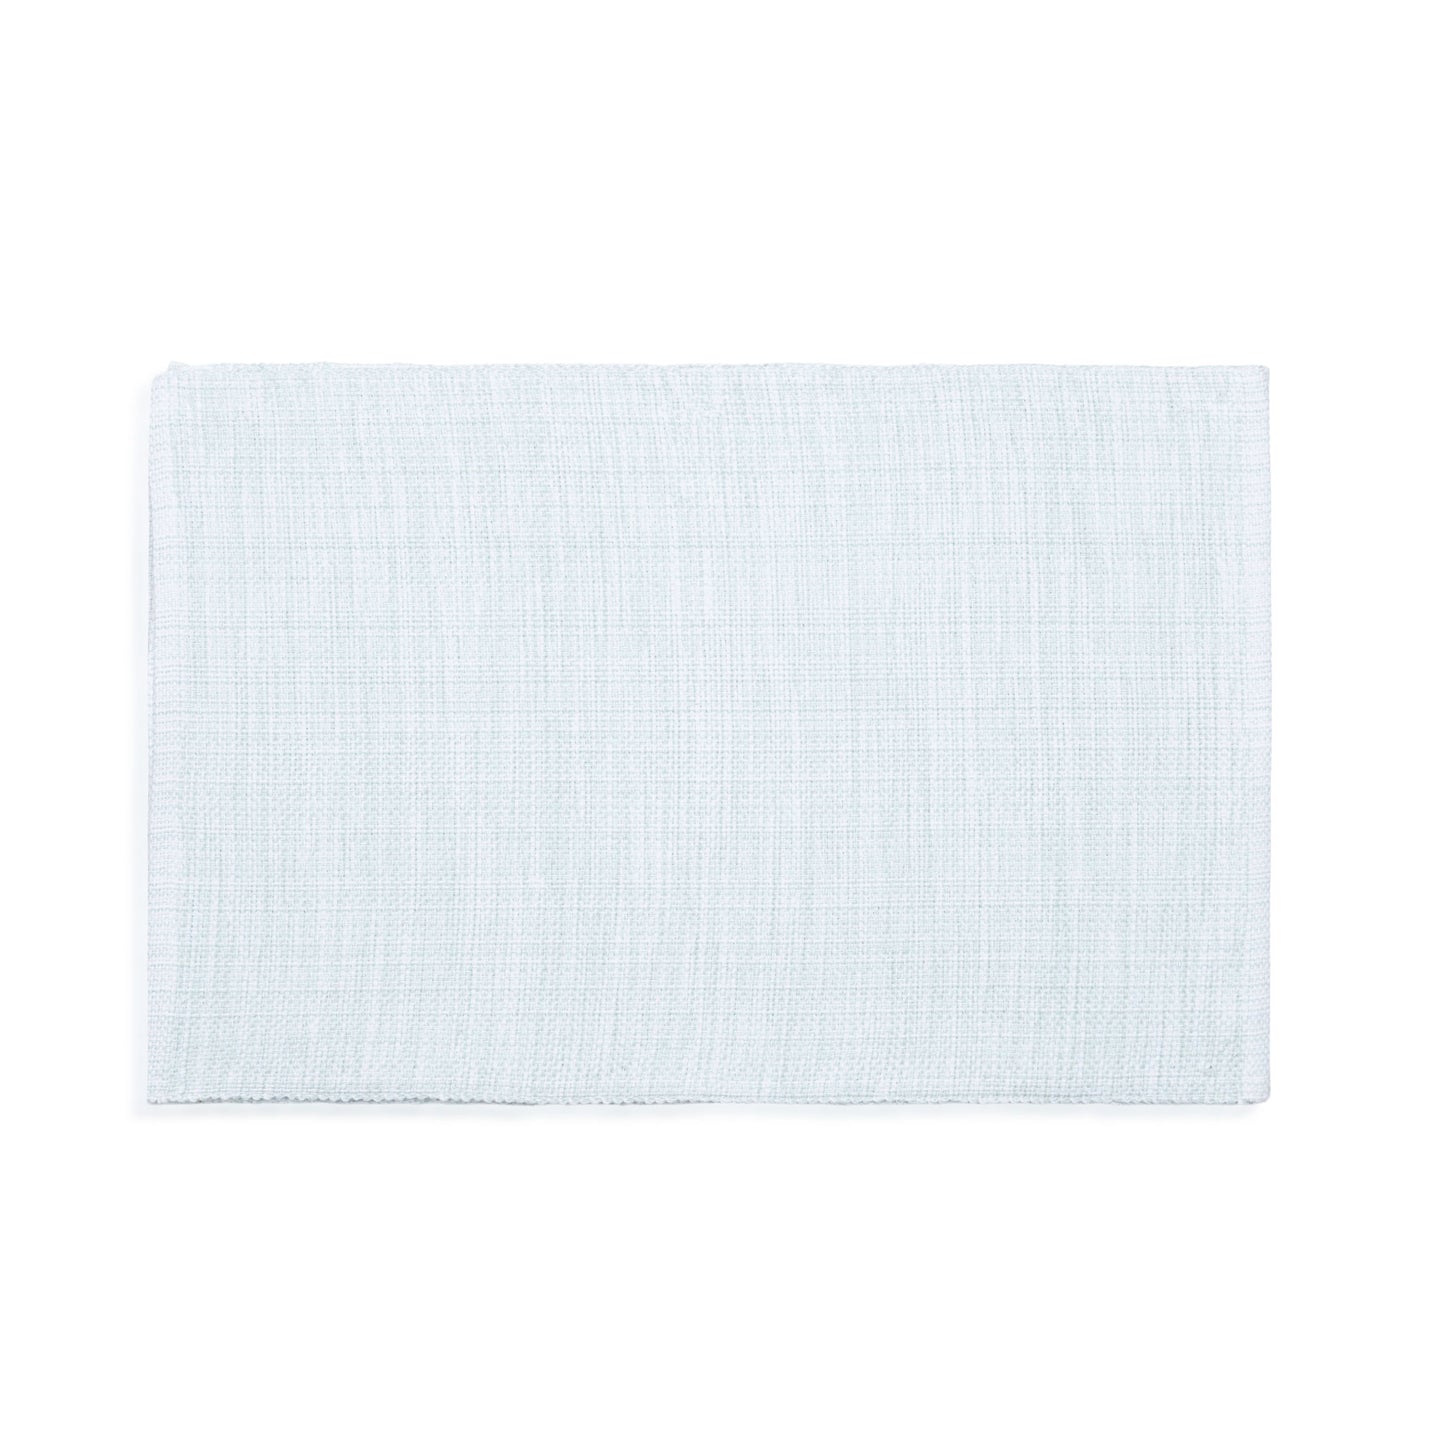 Mint Textured Woven Dining Room Table Placemat